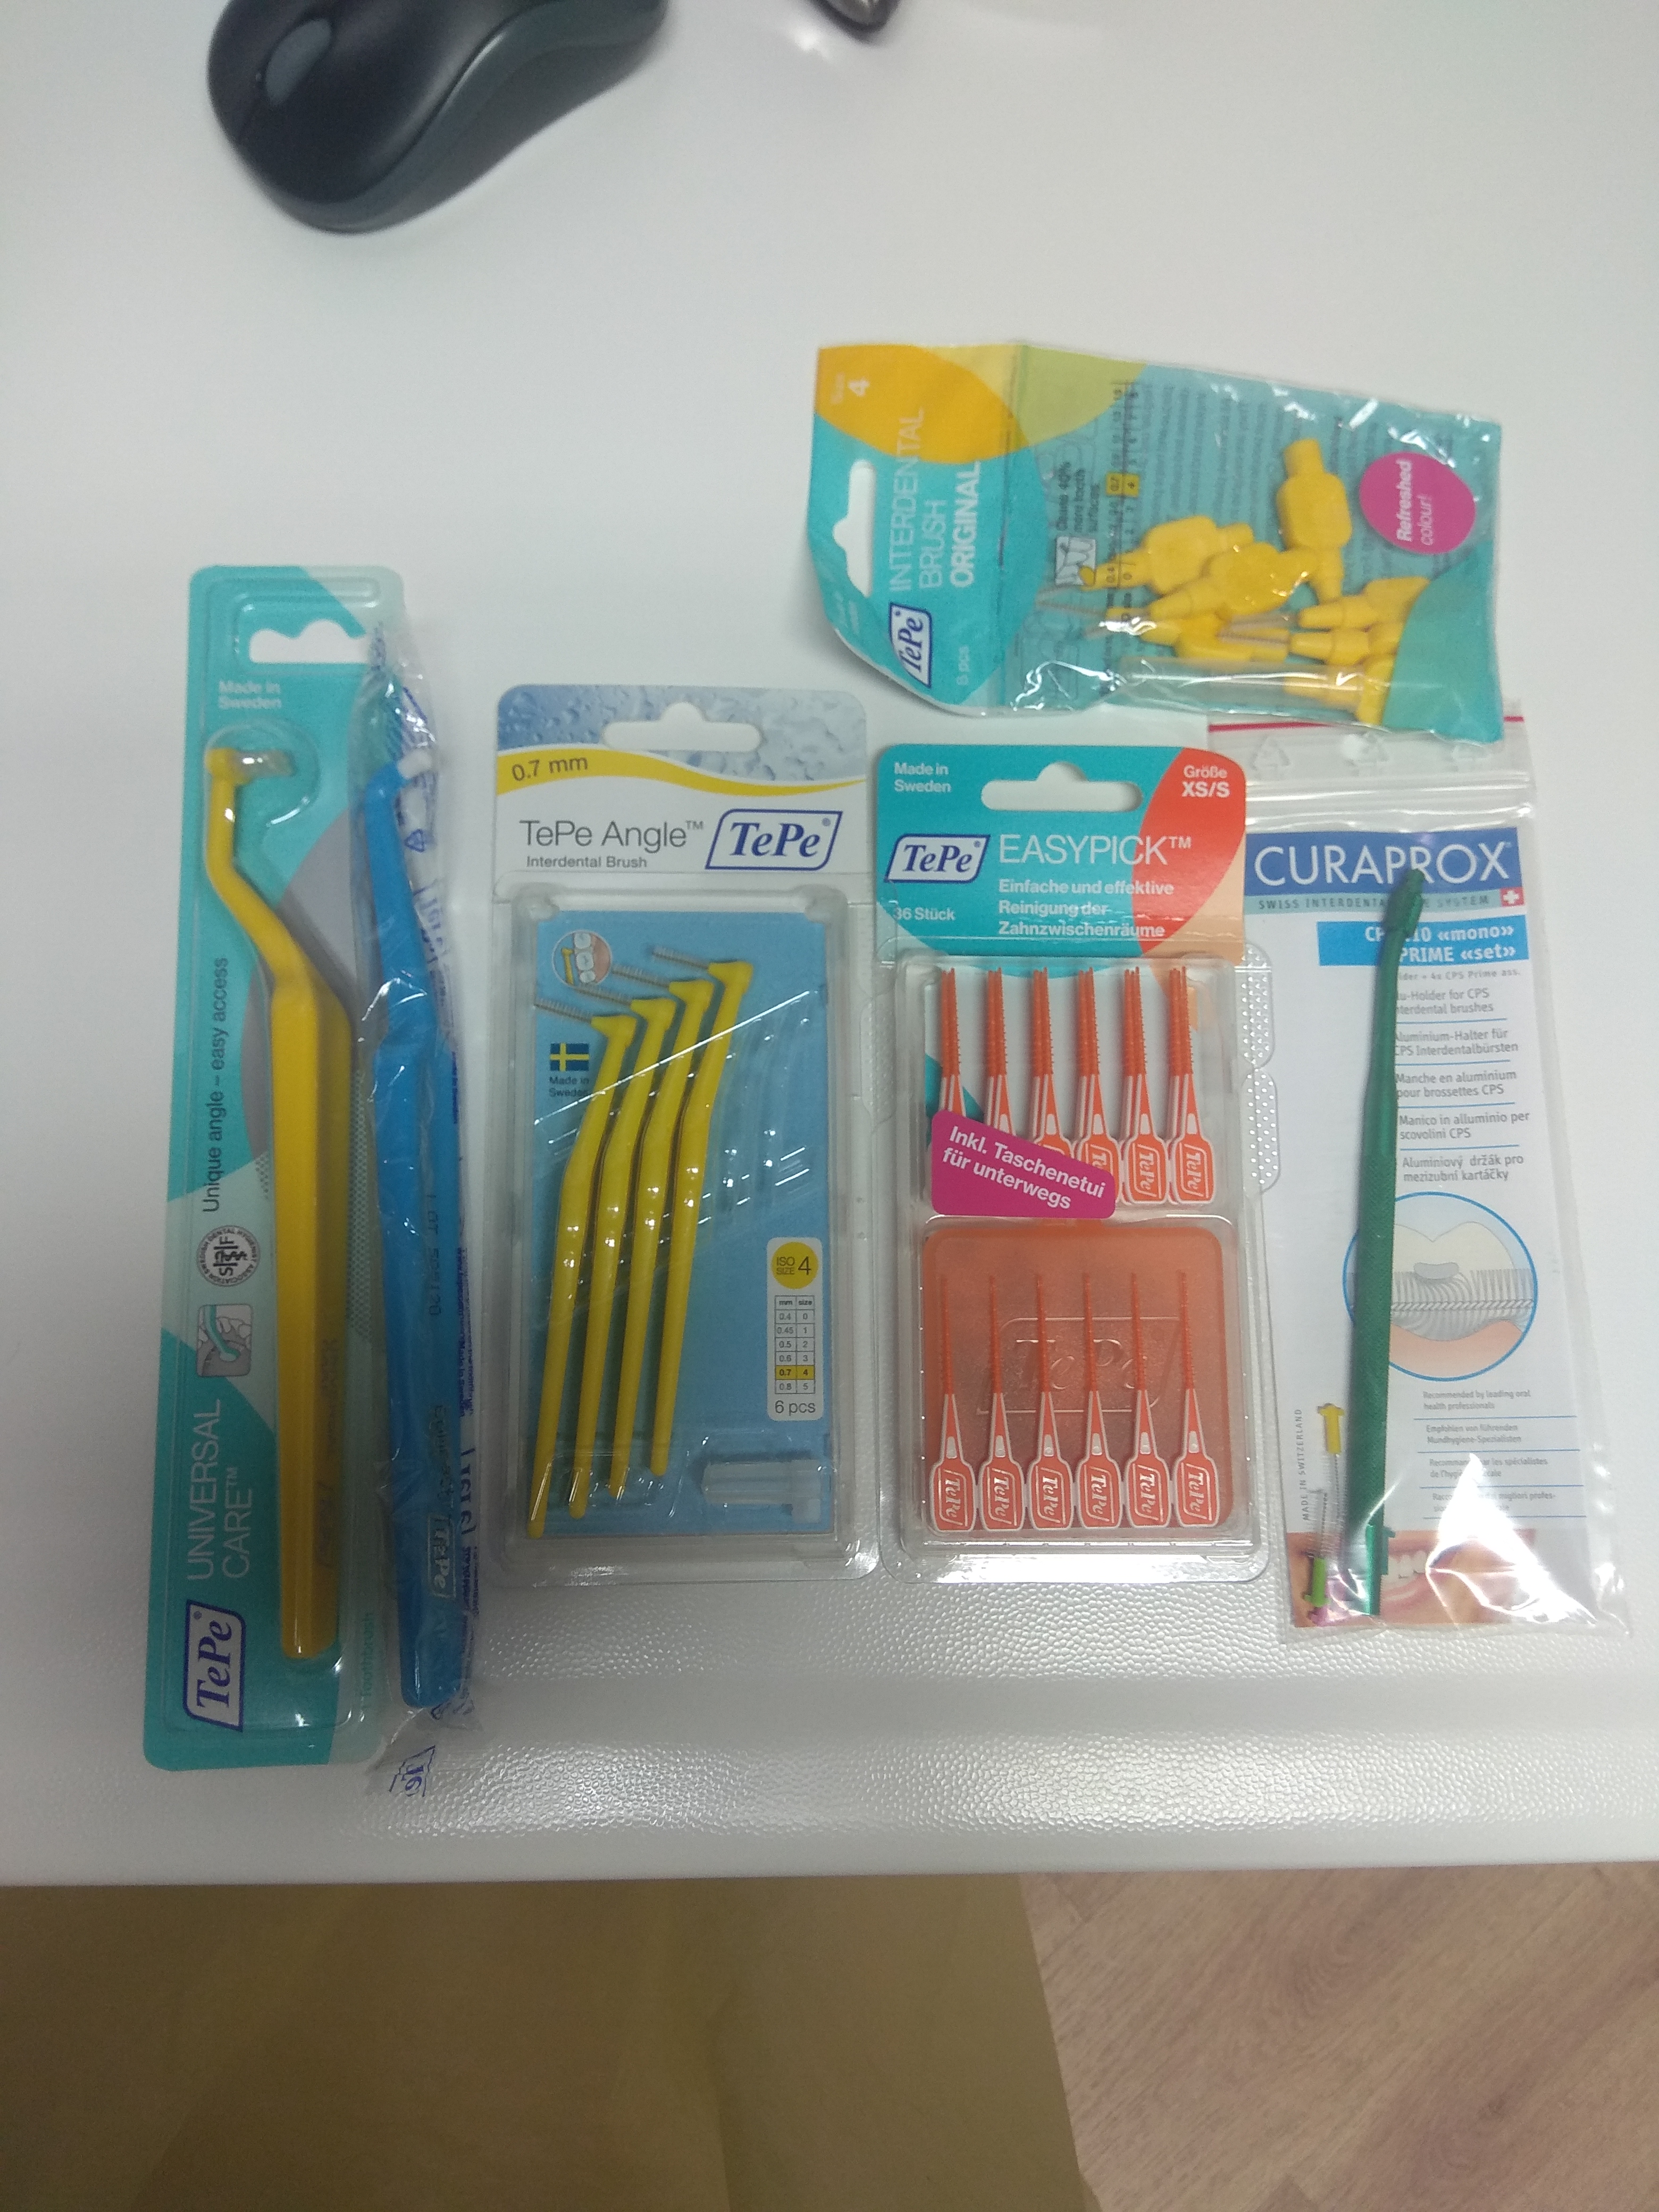 Some of the products commonly found in a European dental practice